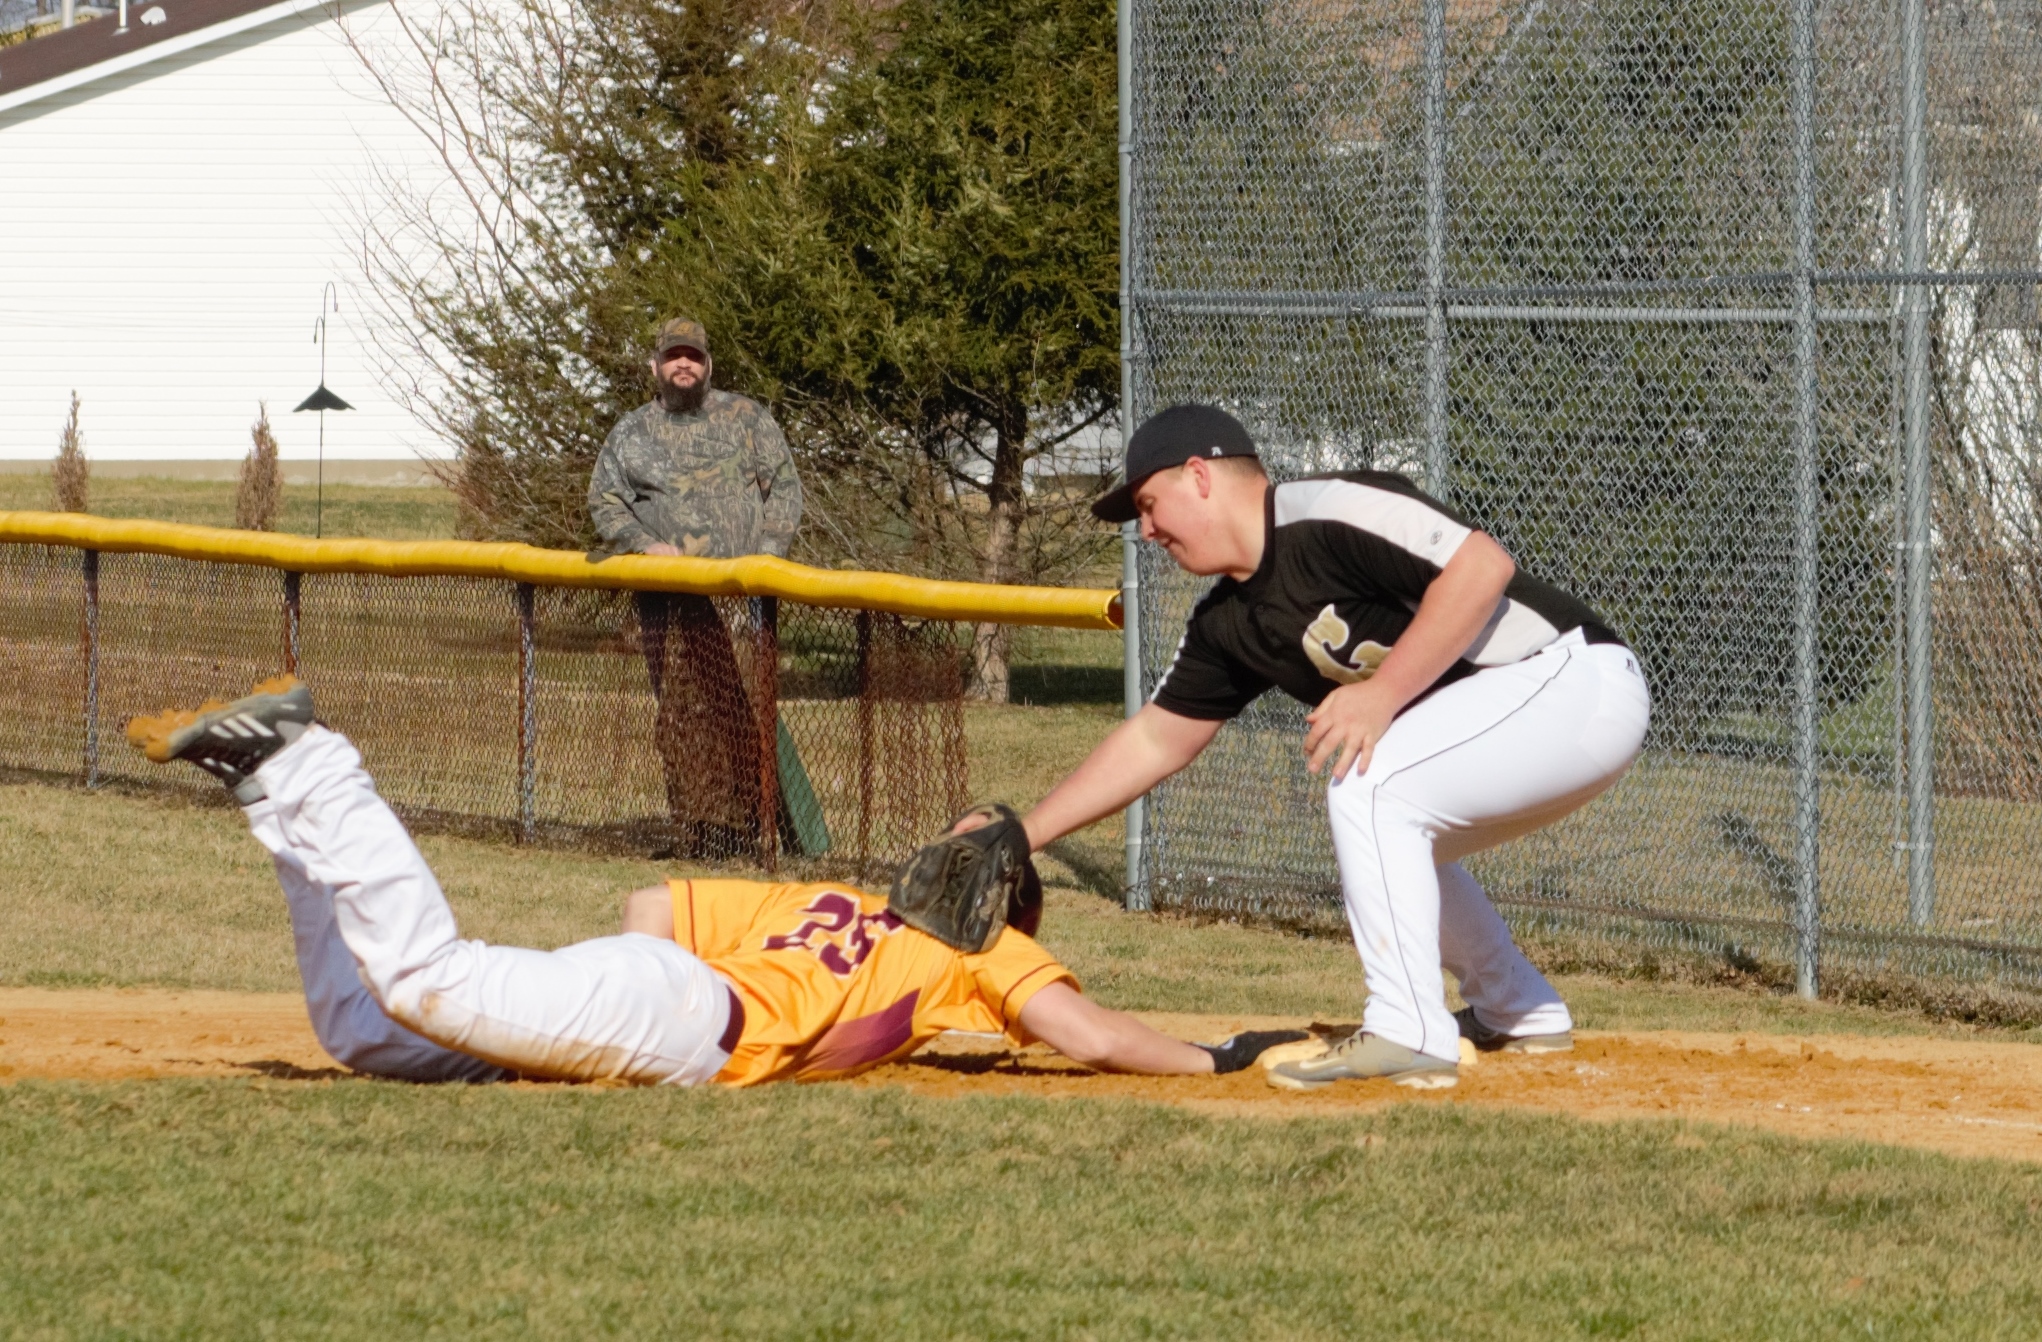 Golden Tide first-baseman Ricky Magnuson applies a late pick-off tag on ECC's Ivan Wortman in yesterday's game.  Wortman was 4-for-4 to help the Crusaders to a 3-1 win.